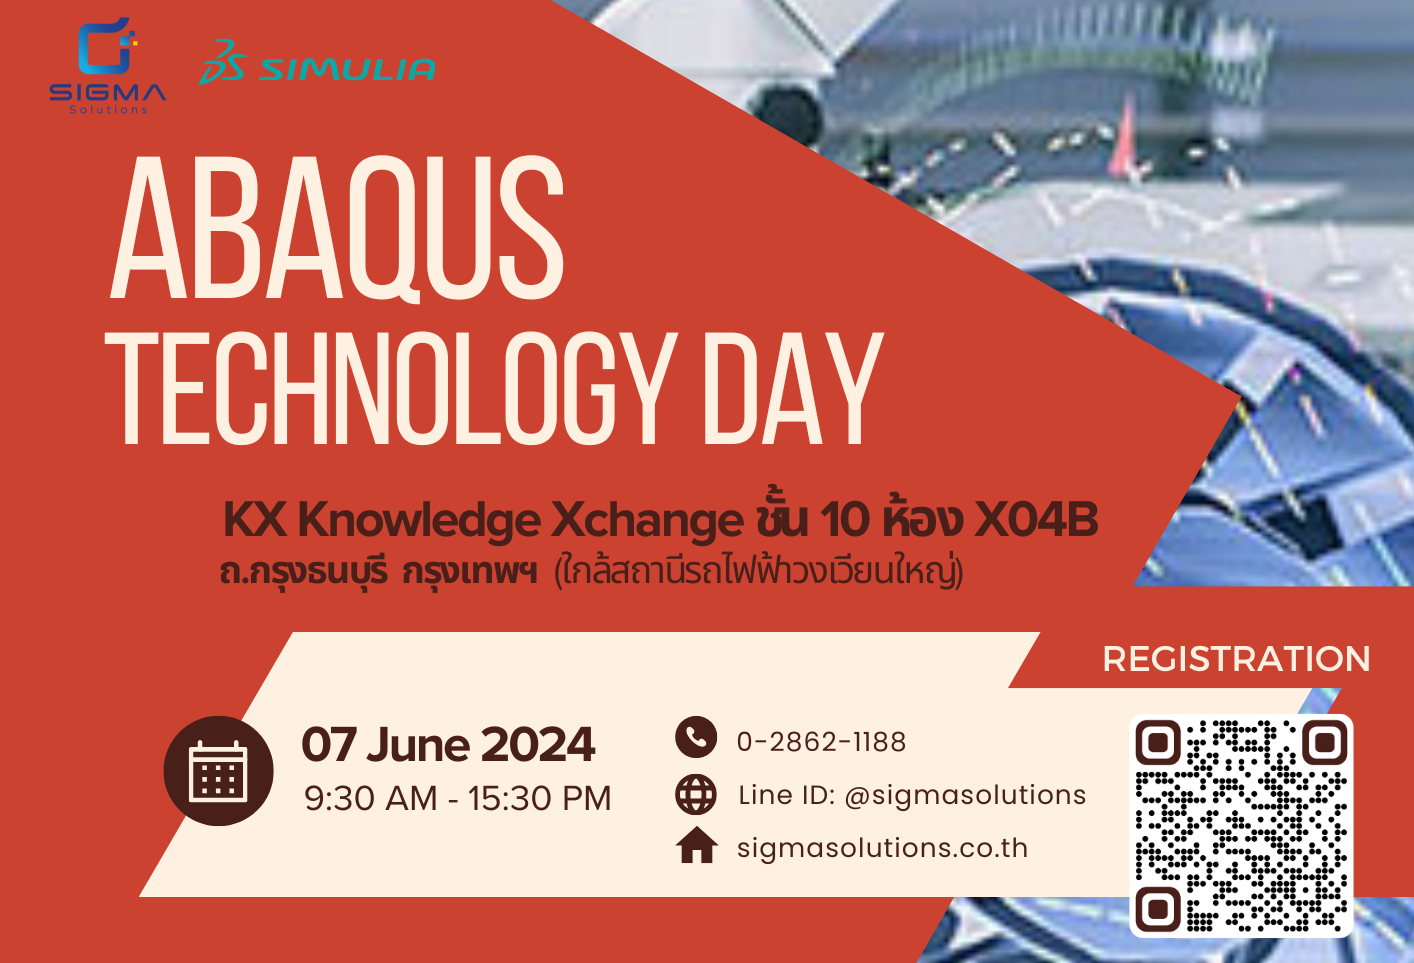 Abaqus Technology Day 2024